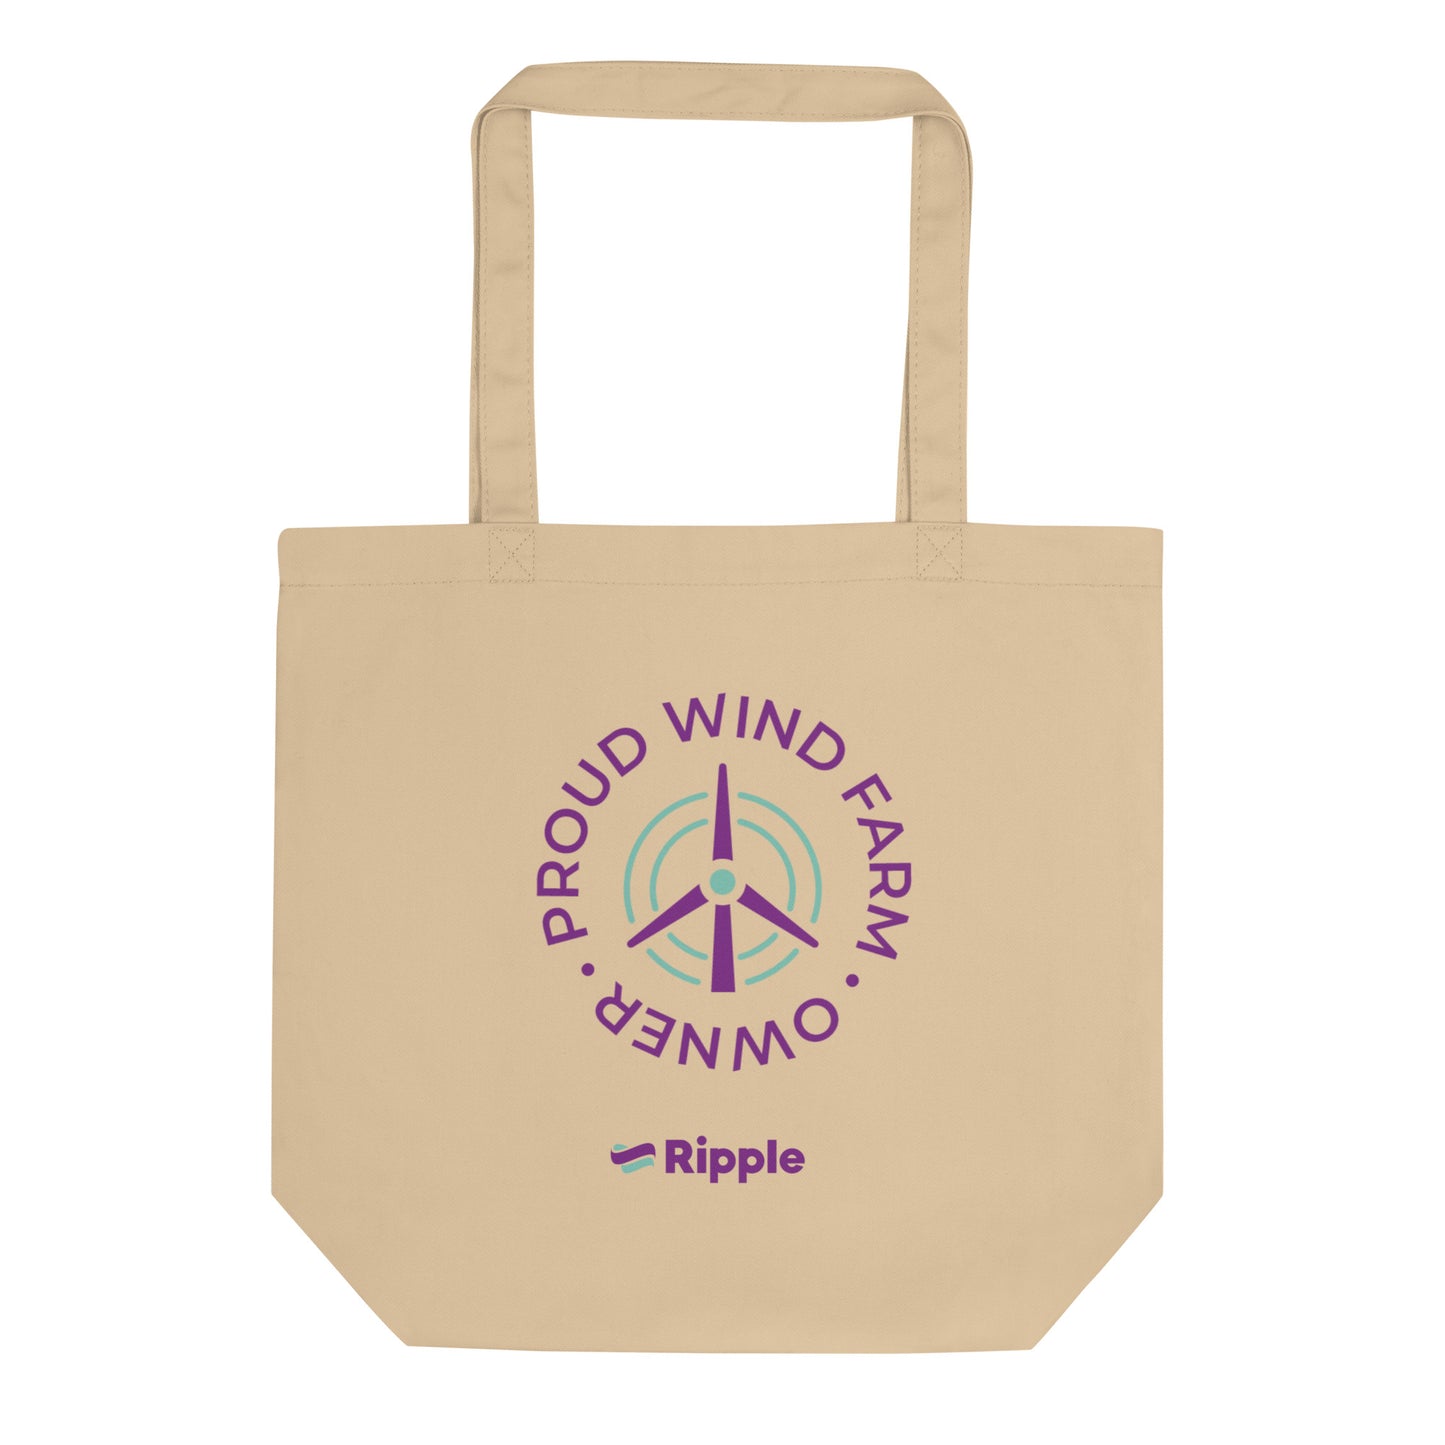 Proud wind farm owner eco tote bag